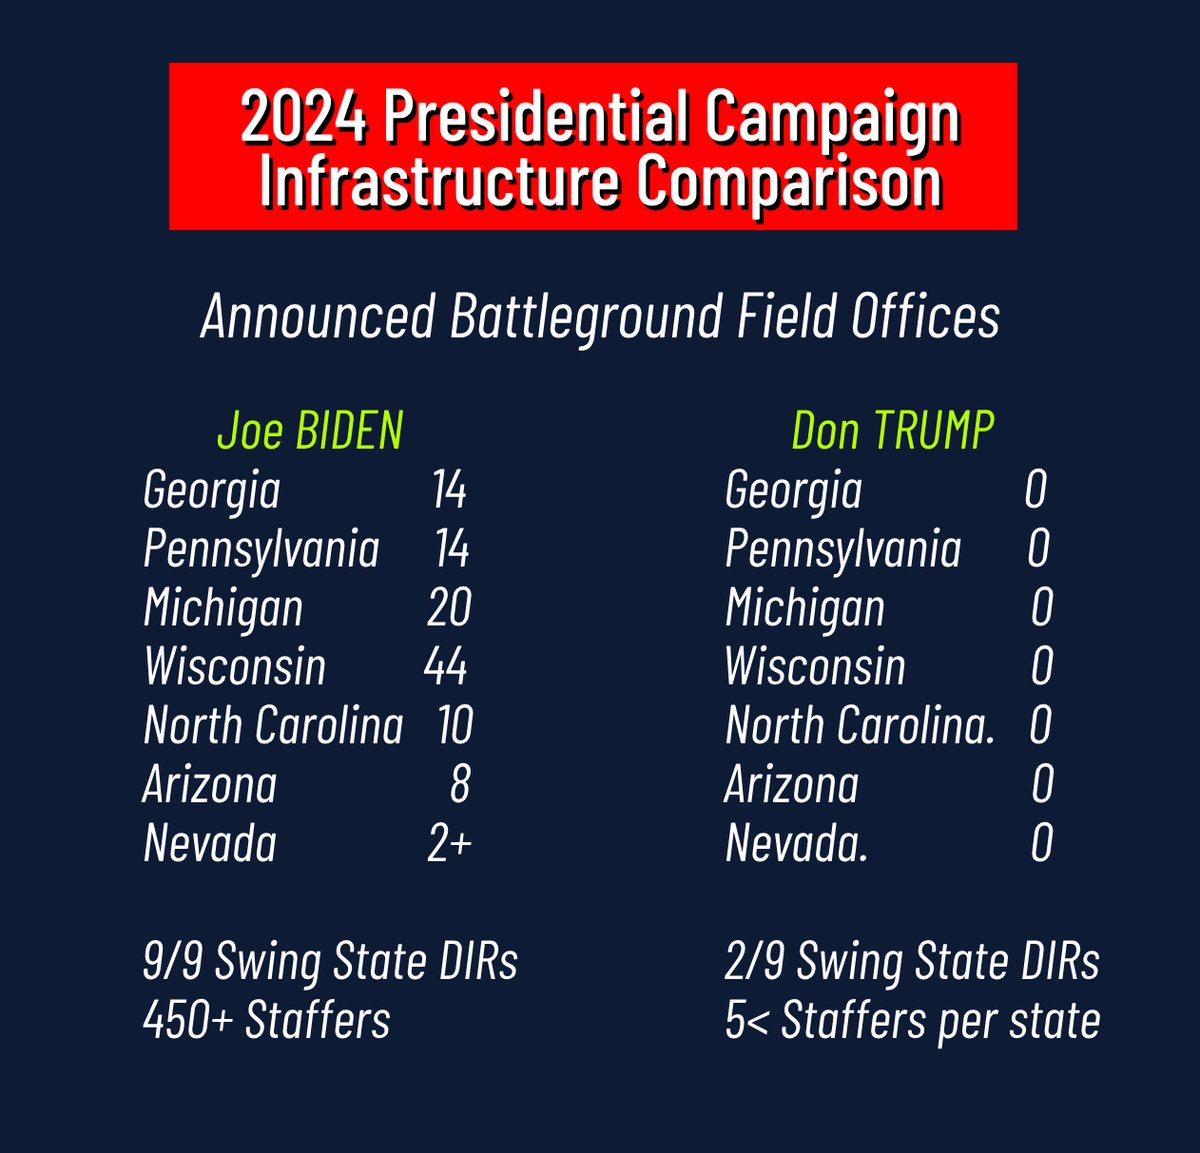 @MuellerSheWrote 🟥🟥🟥 MY 2 CENTS Trump won Florida by only 3.3% of the vote in 2020. 1) I believe Abortion on the ballot and the independents not liking the J6 coup will give Biden the win in FL. 2) Biden will keep all the states he won in 2020 so his electoral victory will larger in 2024